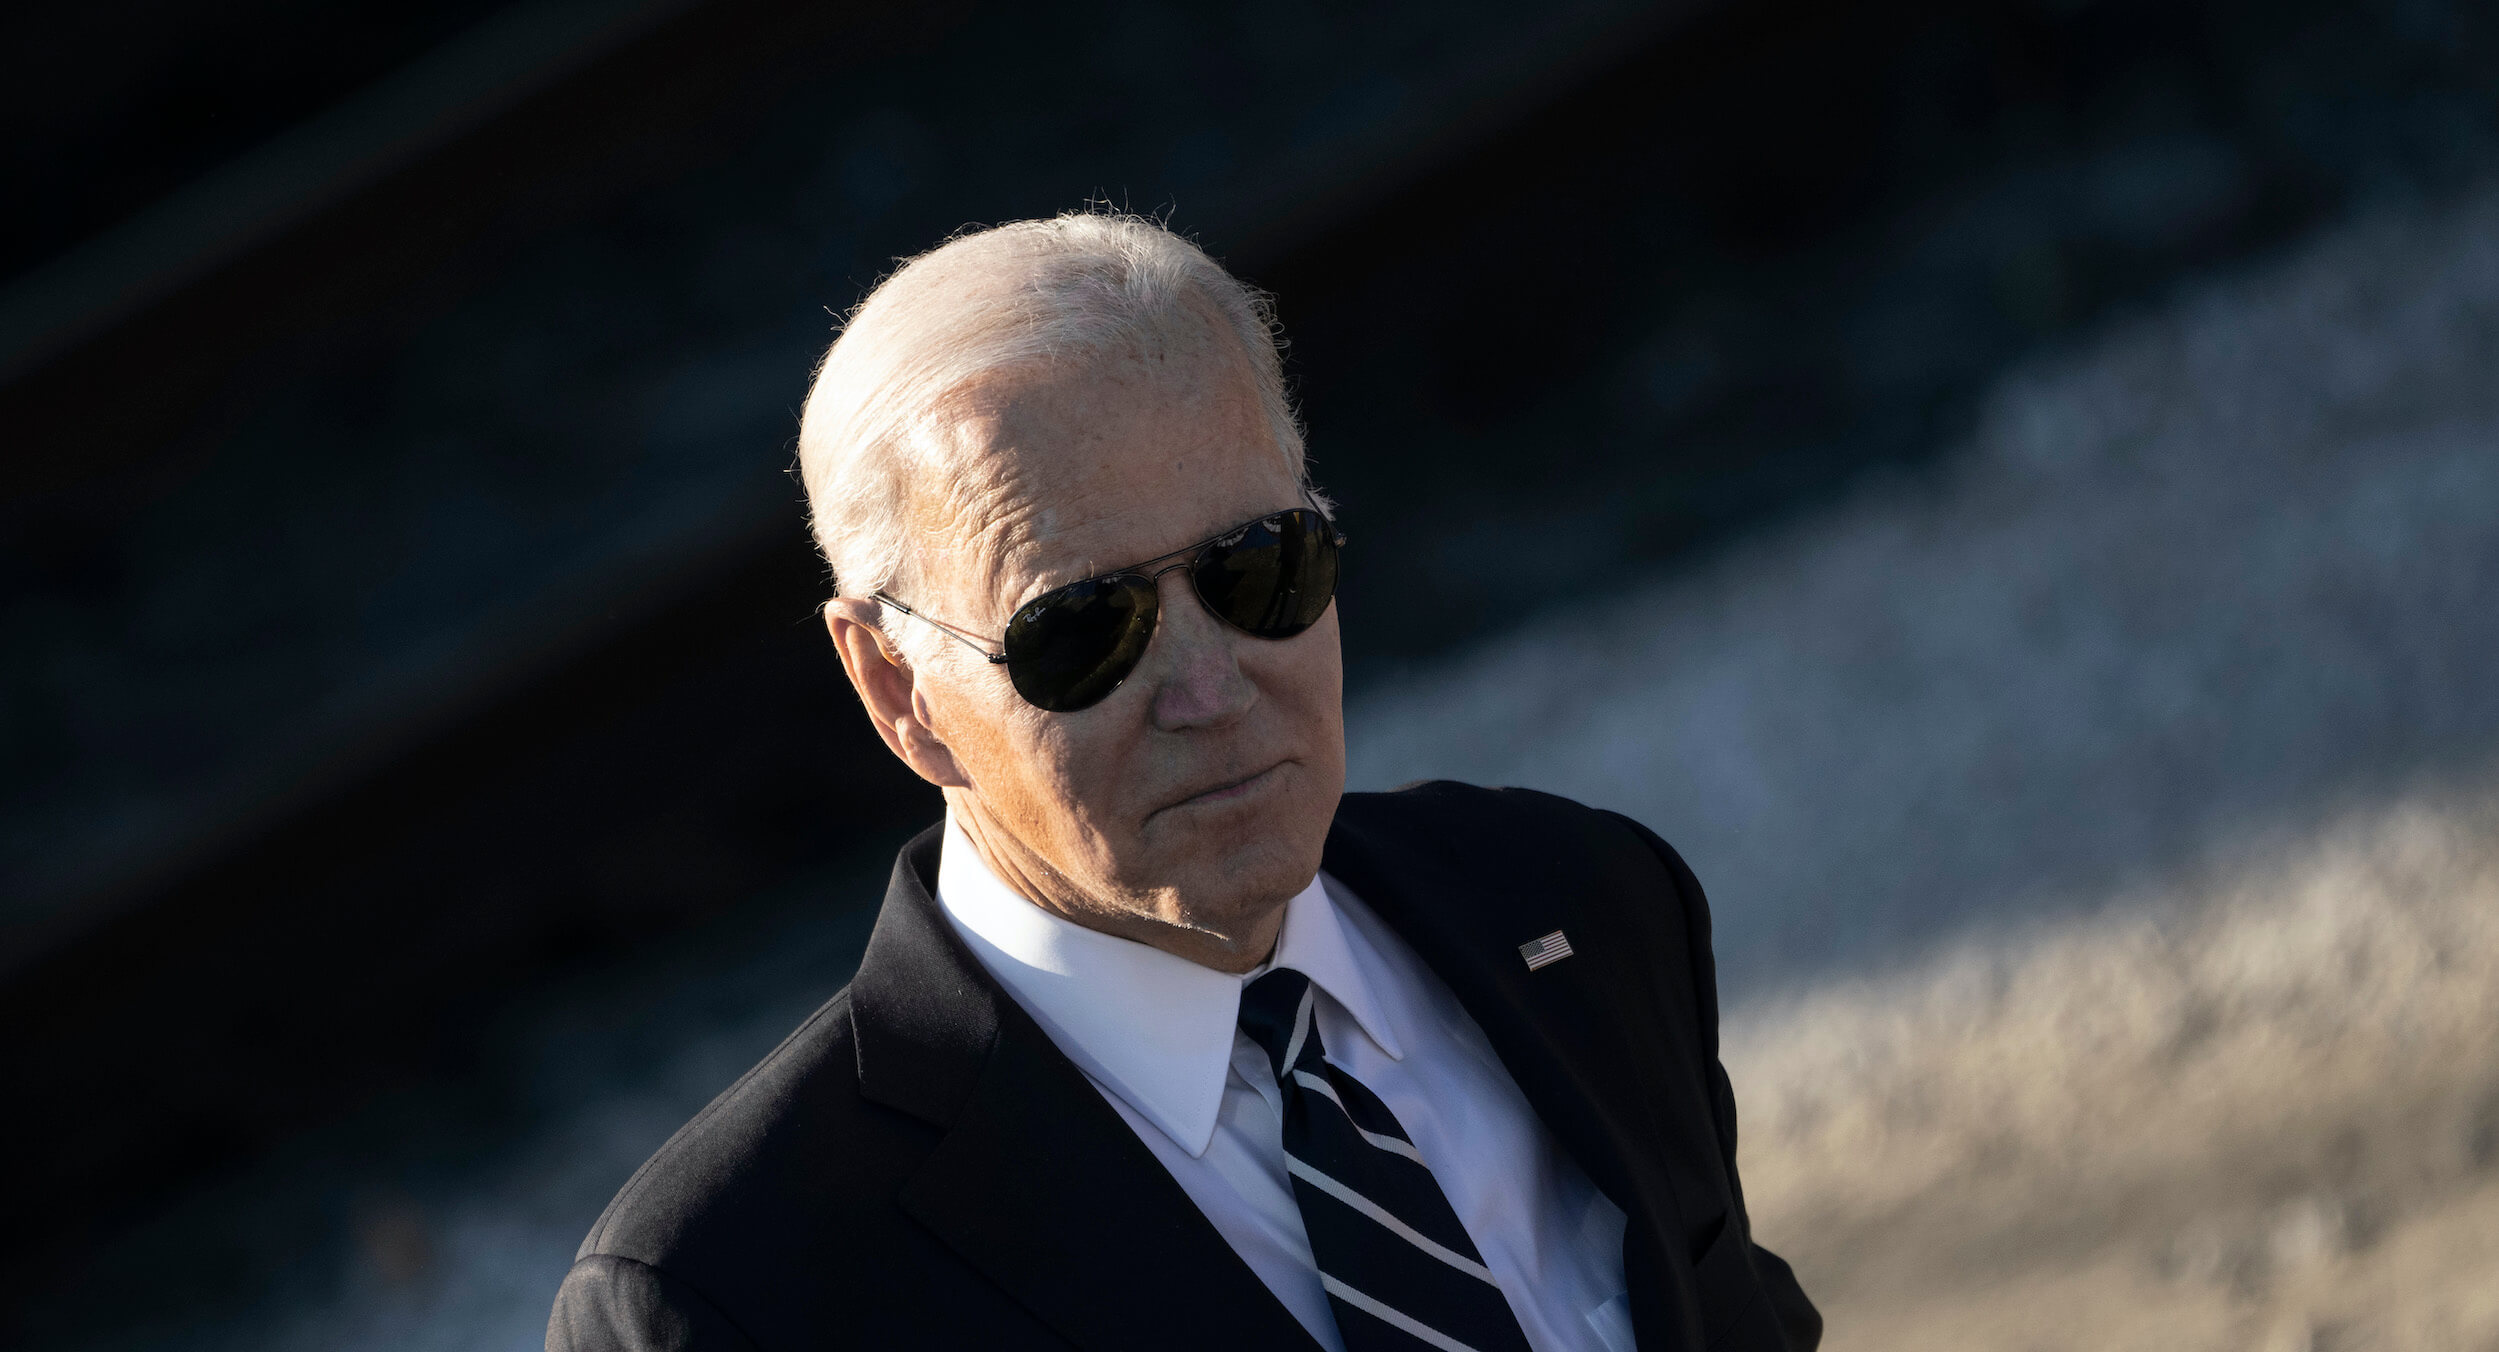 Why Biden’s Document Retention Is Profoundly Troubling › American Greatness